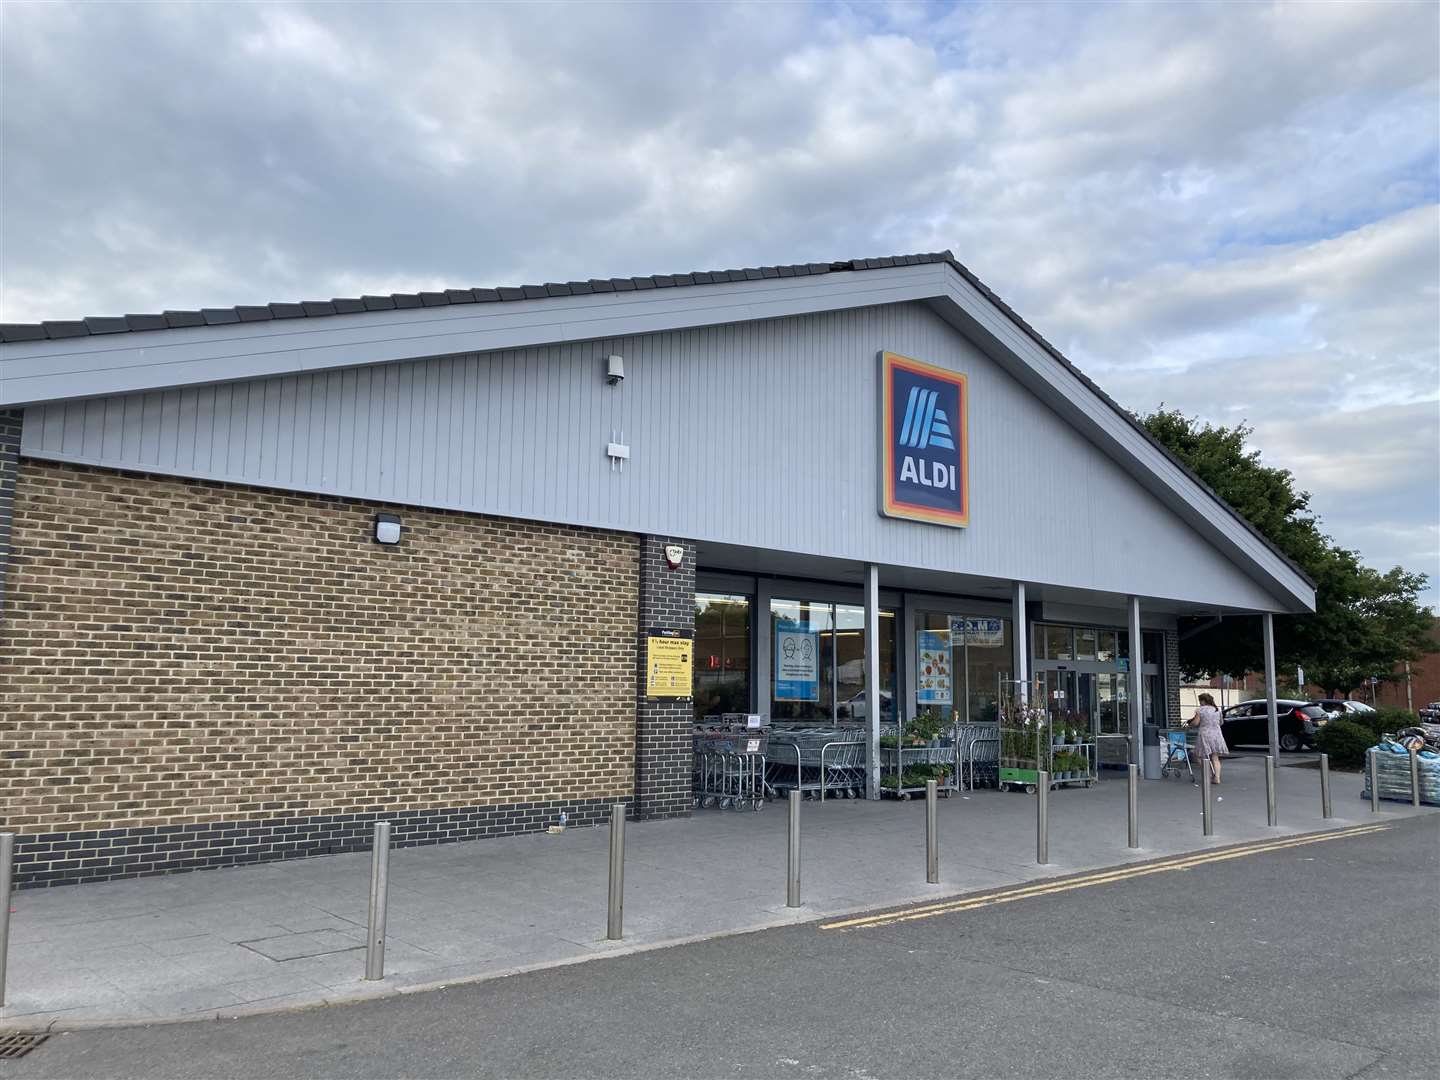 Home Bargains are said to be moving into this Aldi store in Sheerness